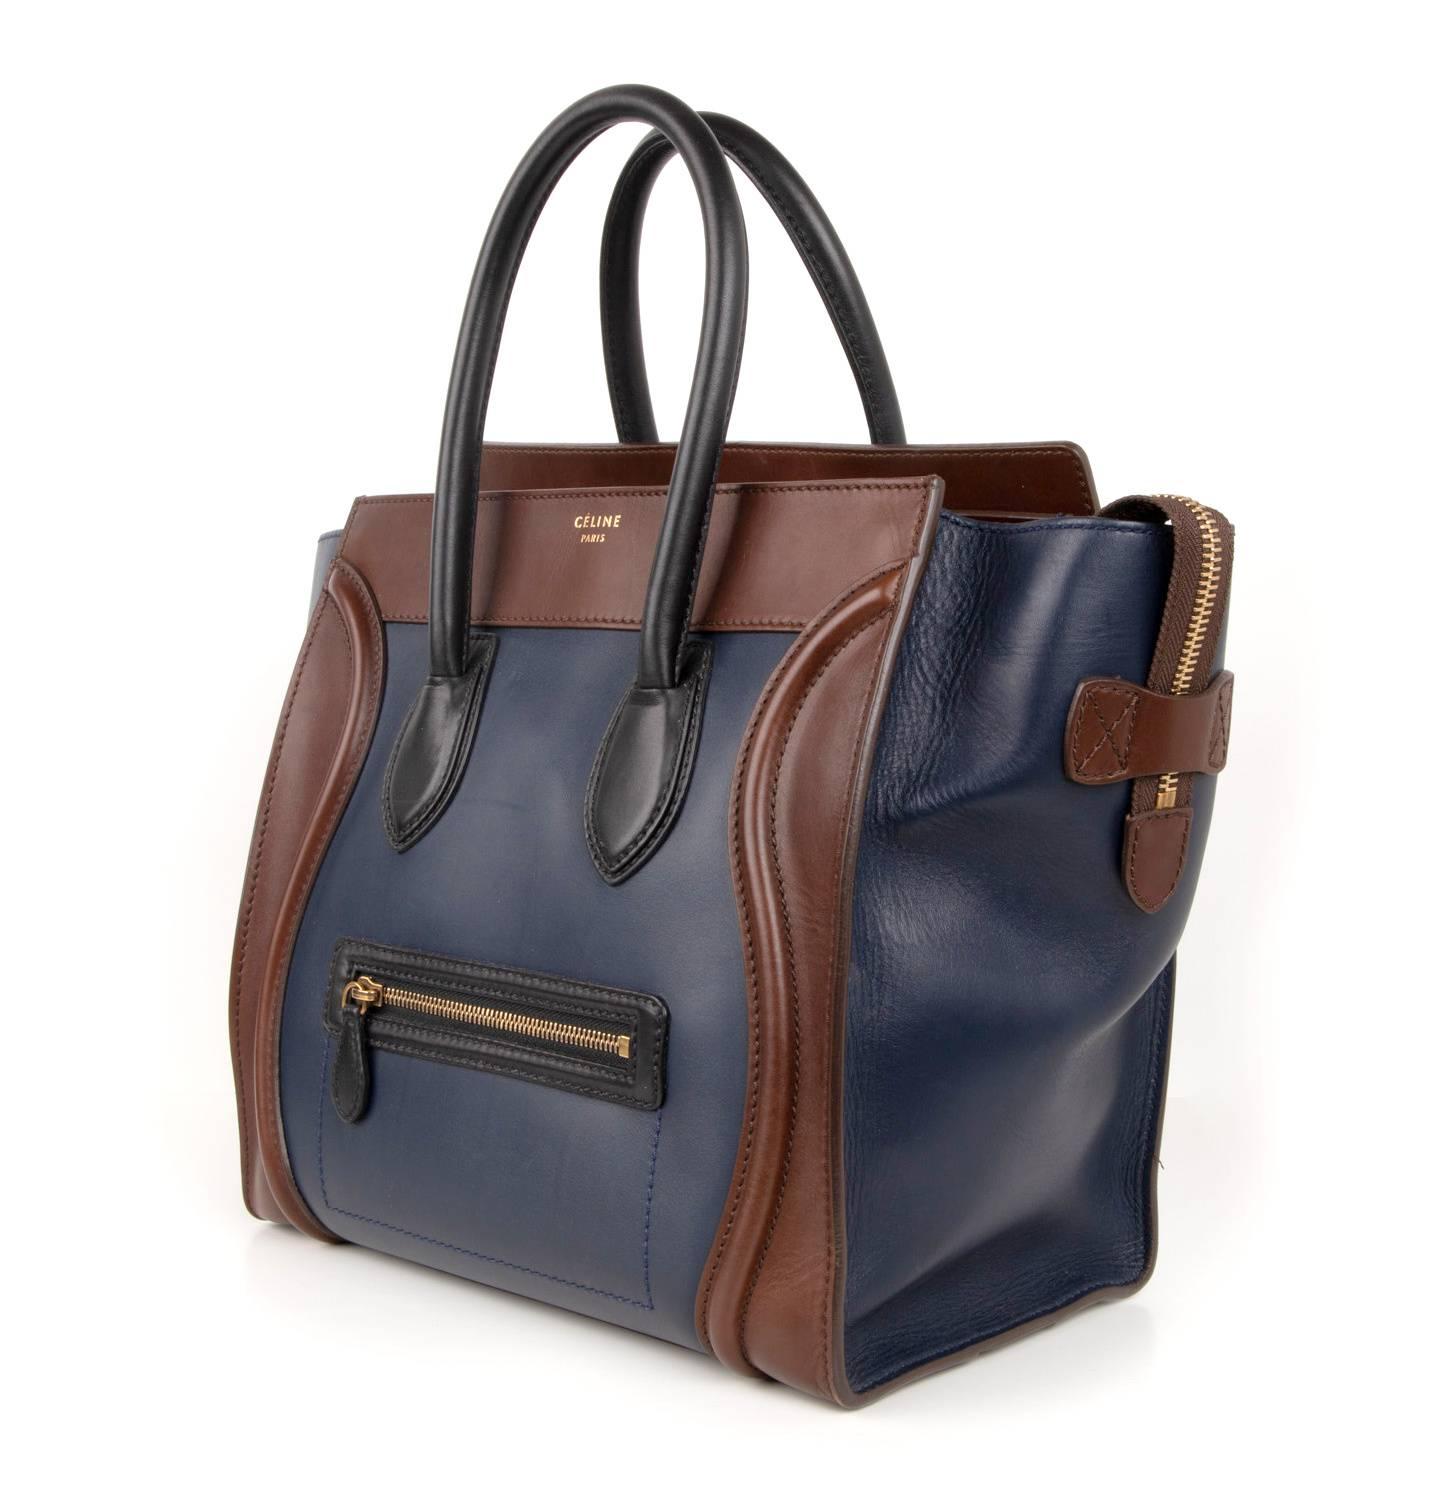 Guaranteed authentic Celine Tri colour medium Phantom luggage tote bag.
An iconic beauty in Navy and Brown with Black front zip and handles. 
Zip top with 2 interior slot pockets and 1 zip pocket. 
1 exterior zip pocket. 
4 metal feet.
CELINE PARIS